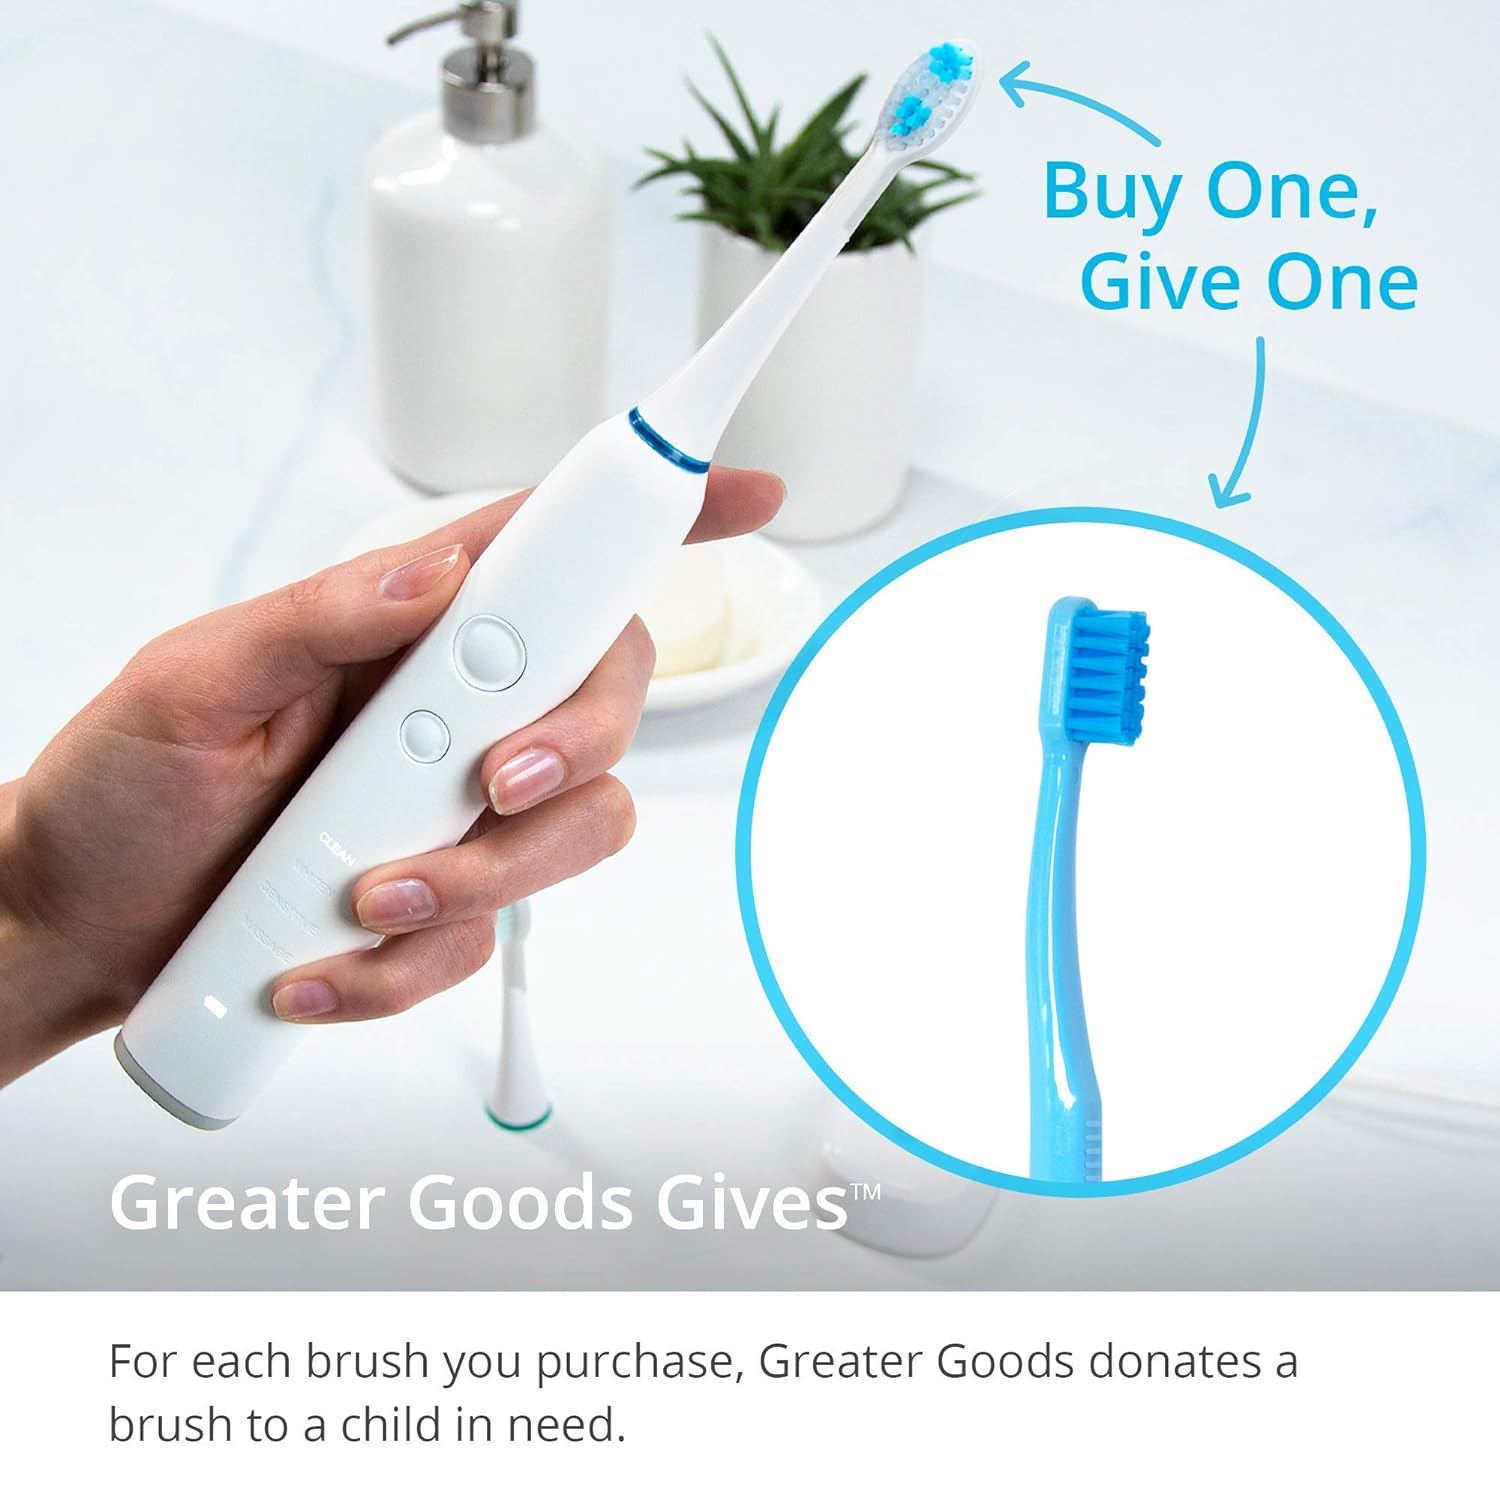 Sonic Electric Toothbrush by GreaterGoods, Home Oral Care Kit Includes Rechargeable Battery, Charger, Holder, & Replacement Heads